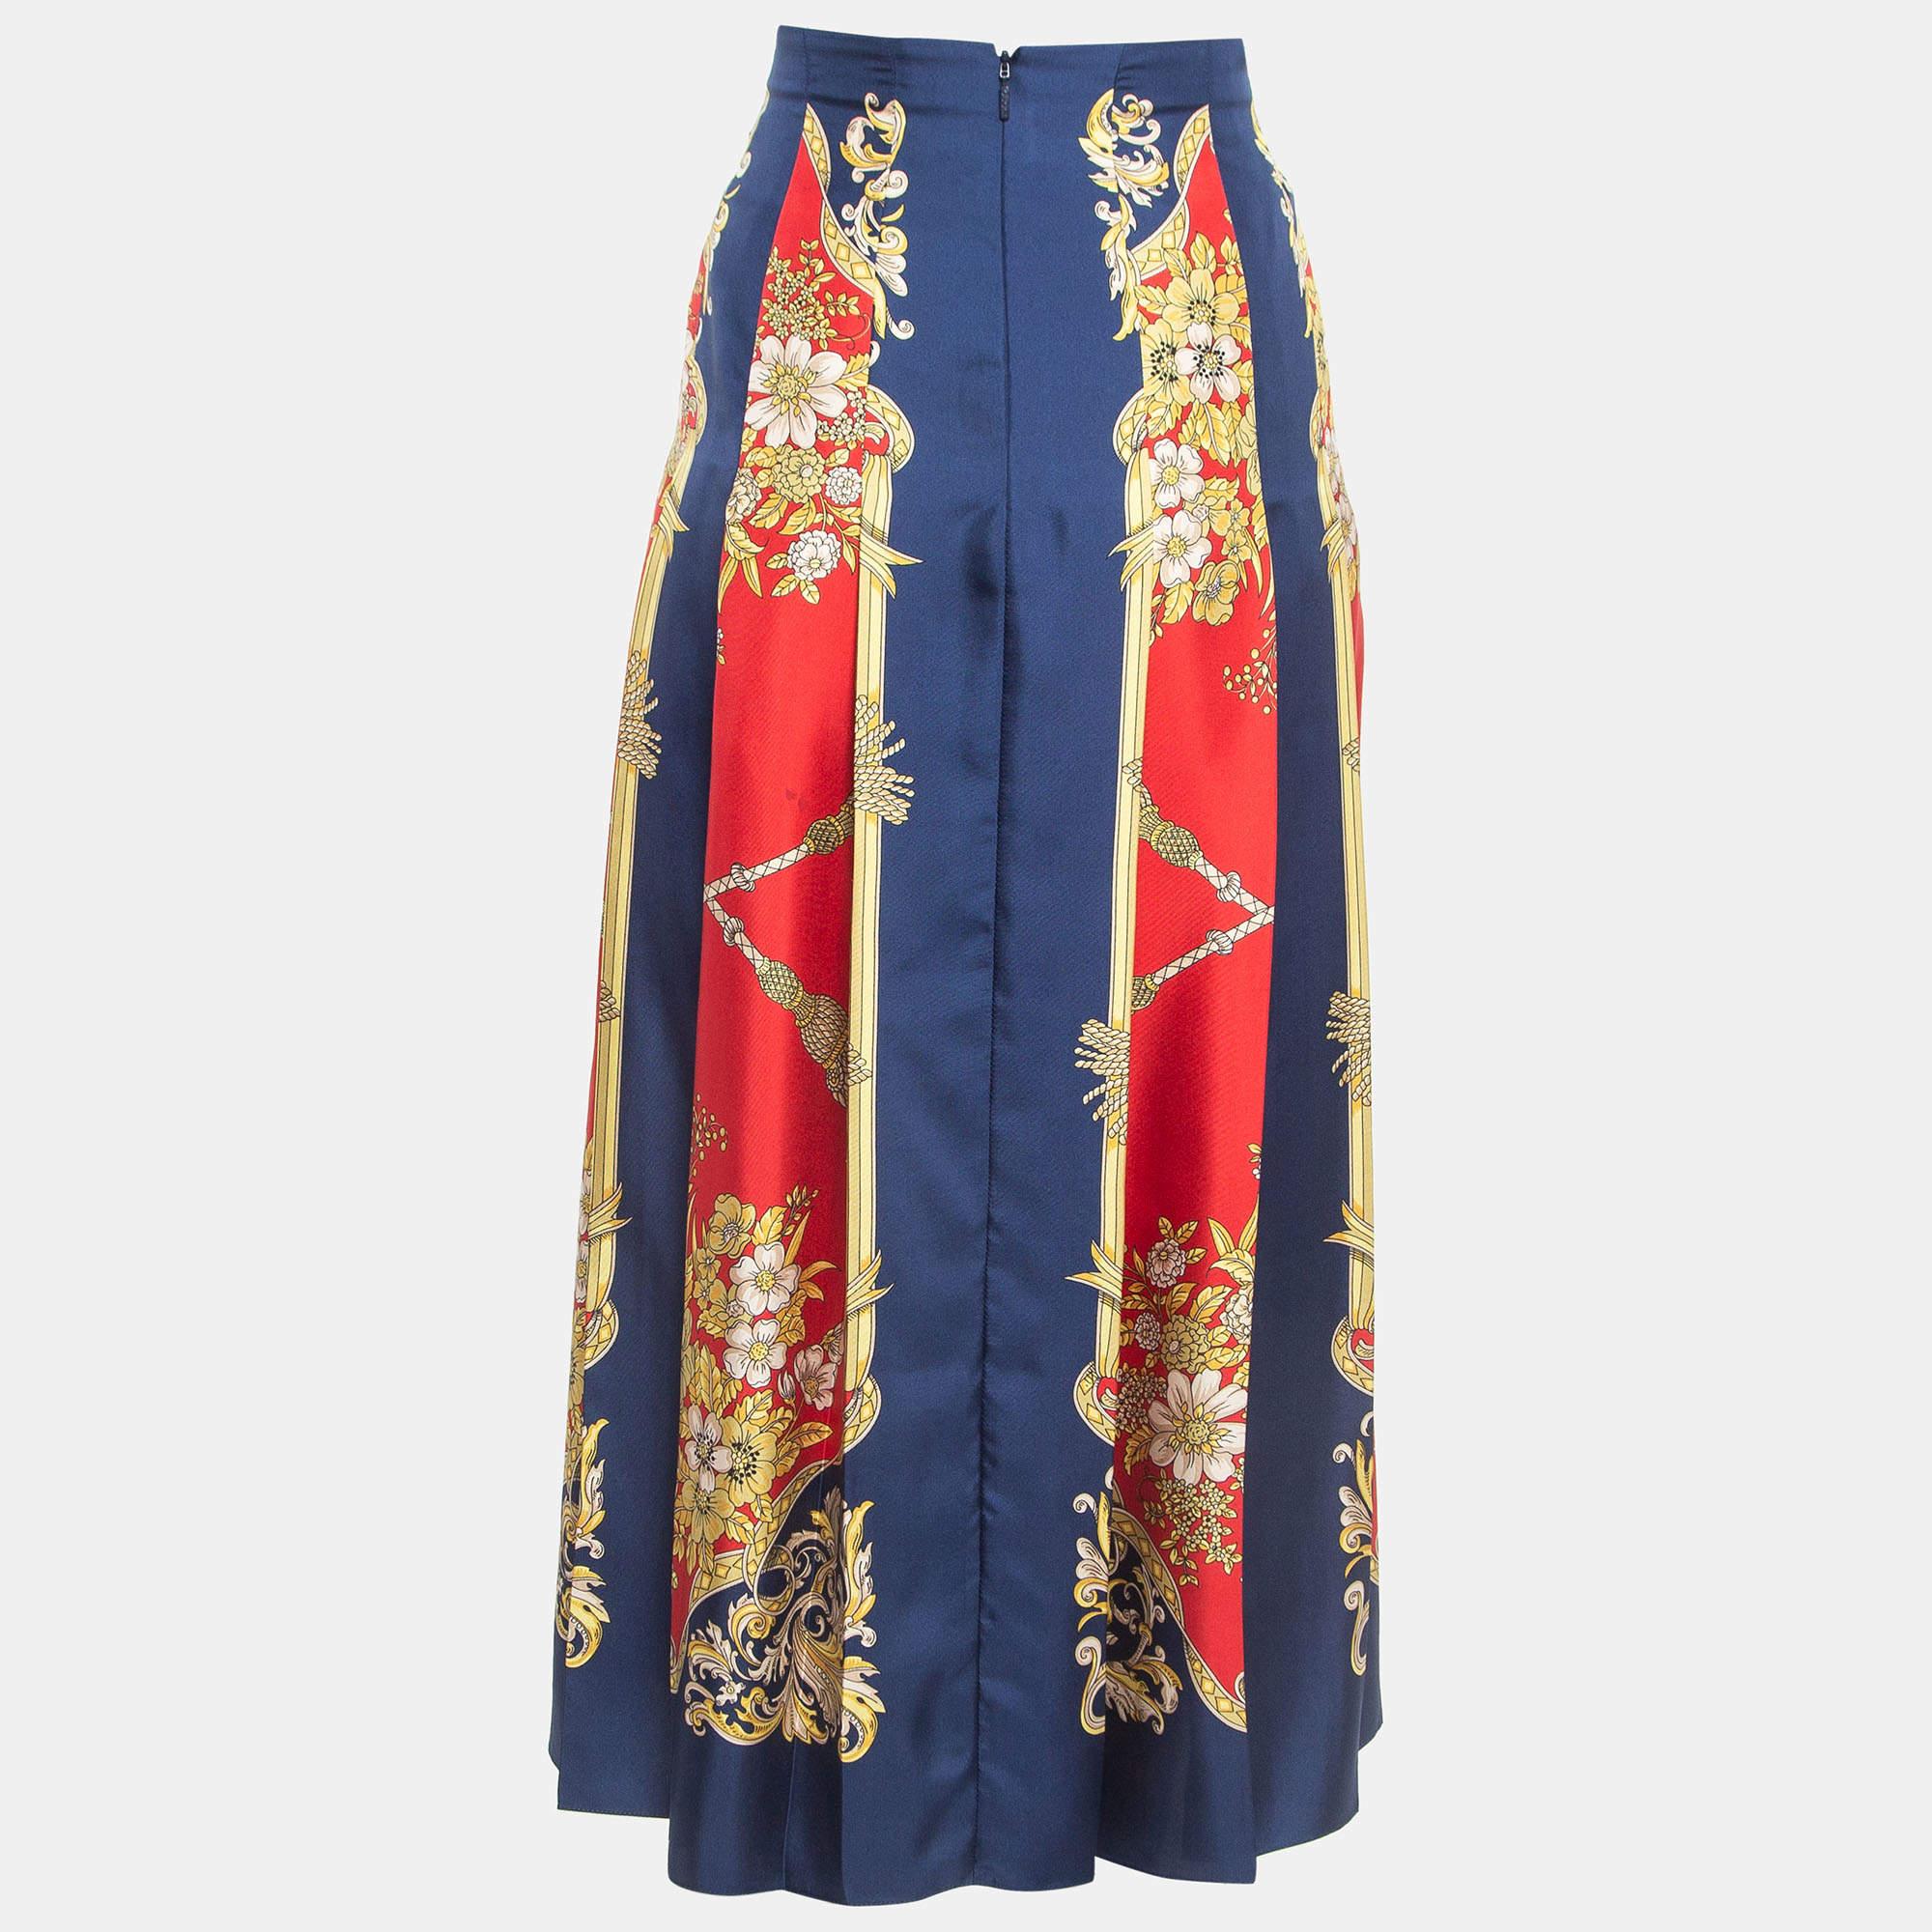 This Gucci multicolored skirt is sure to win you compliments and praises. Stitched from silk, it has a pleated design and a beautiful floral print all over. It will look wonderful with a simple top and a clutch.

